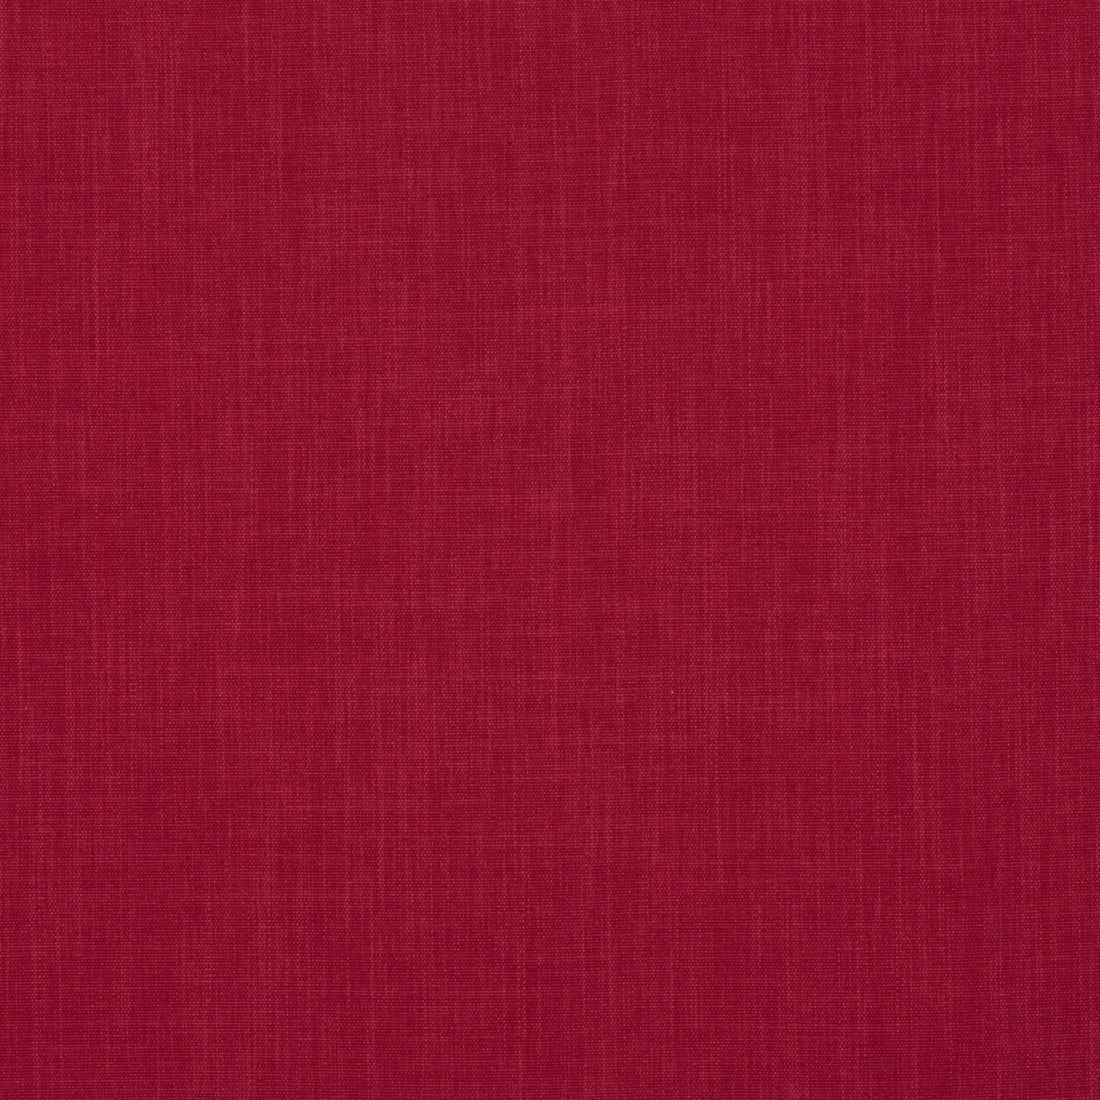 Fernshaw fabric in raspberry color - pattern PF50410.475.0 - by Baker Lifestyle in the Notebooks collection